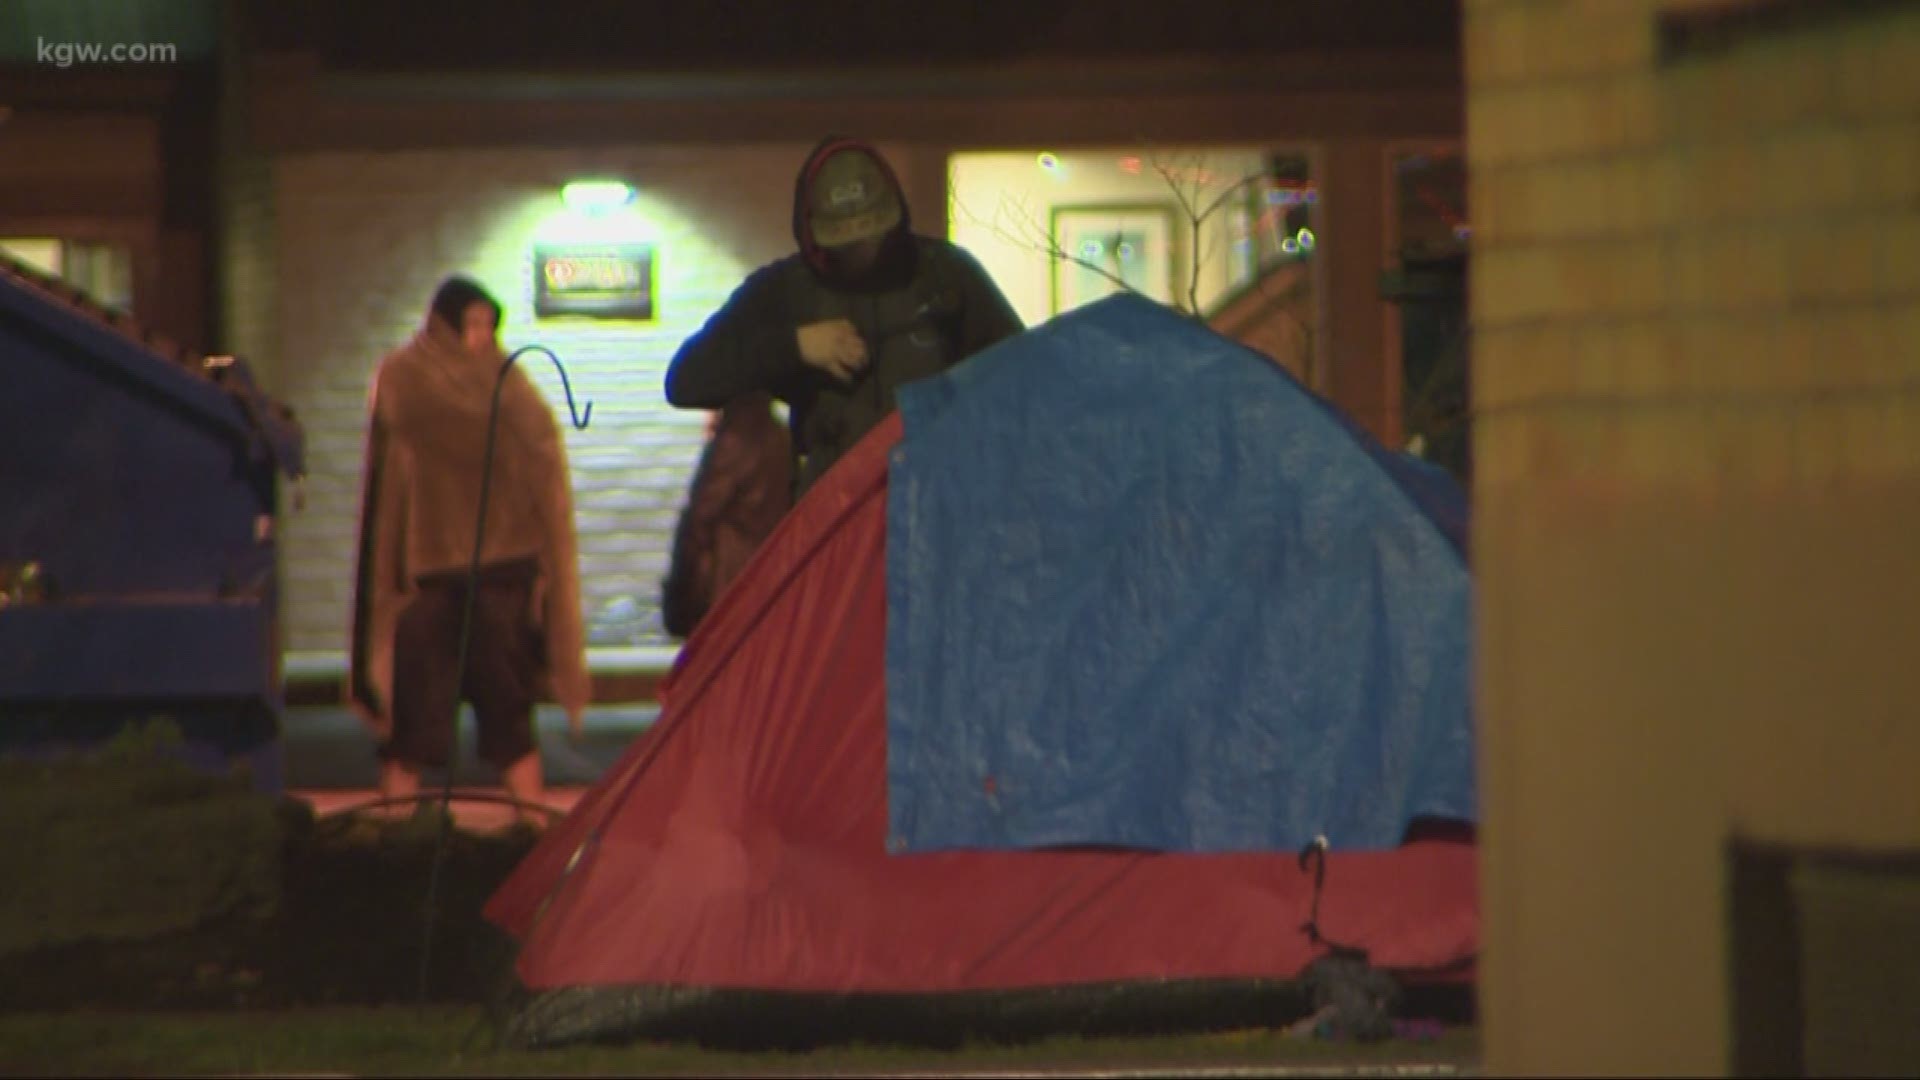 We attended a public hearing on sidewalk camping in Salem.